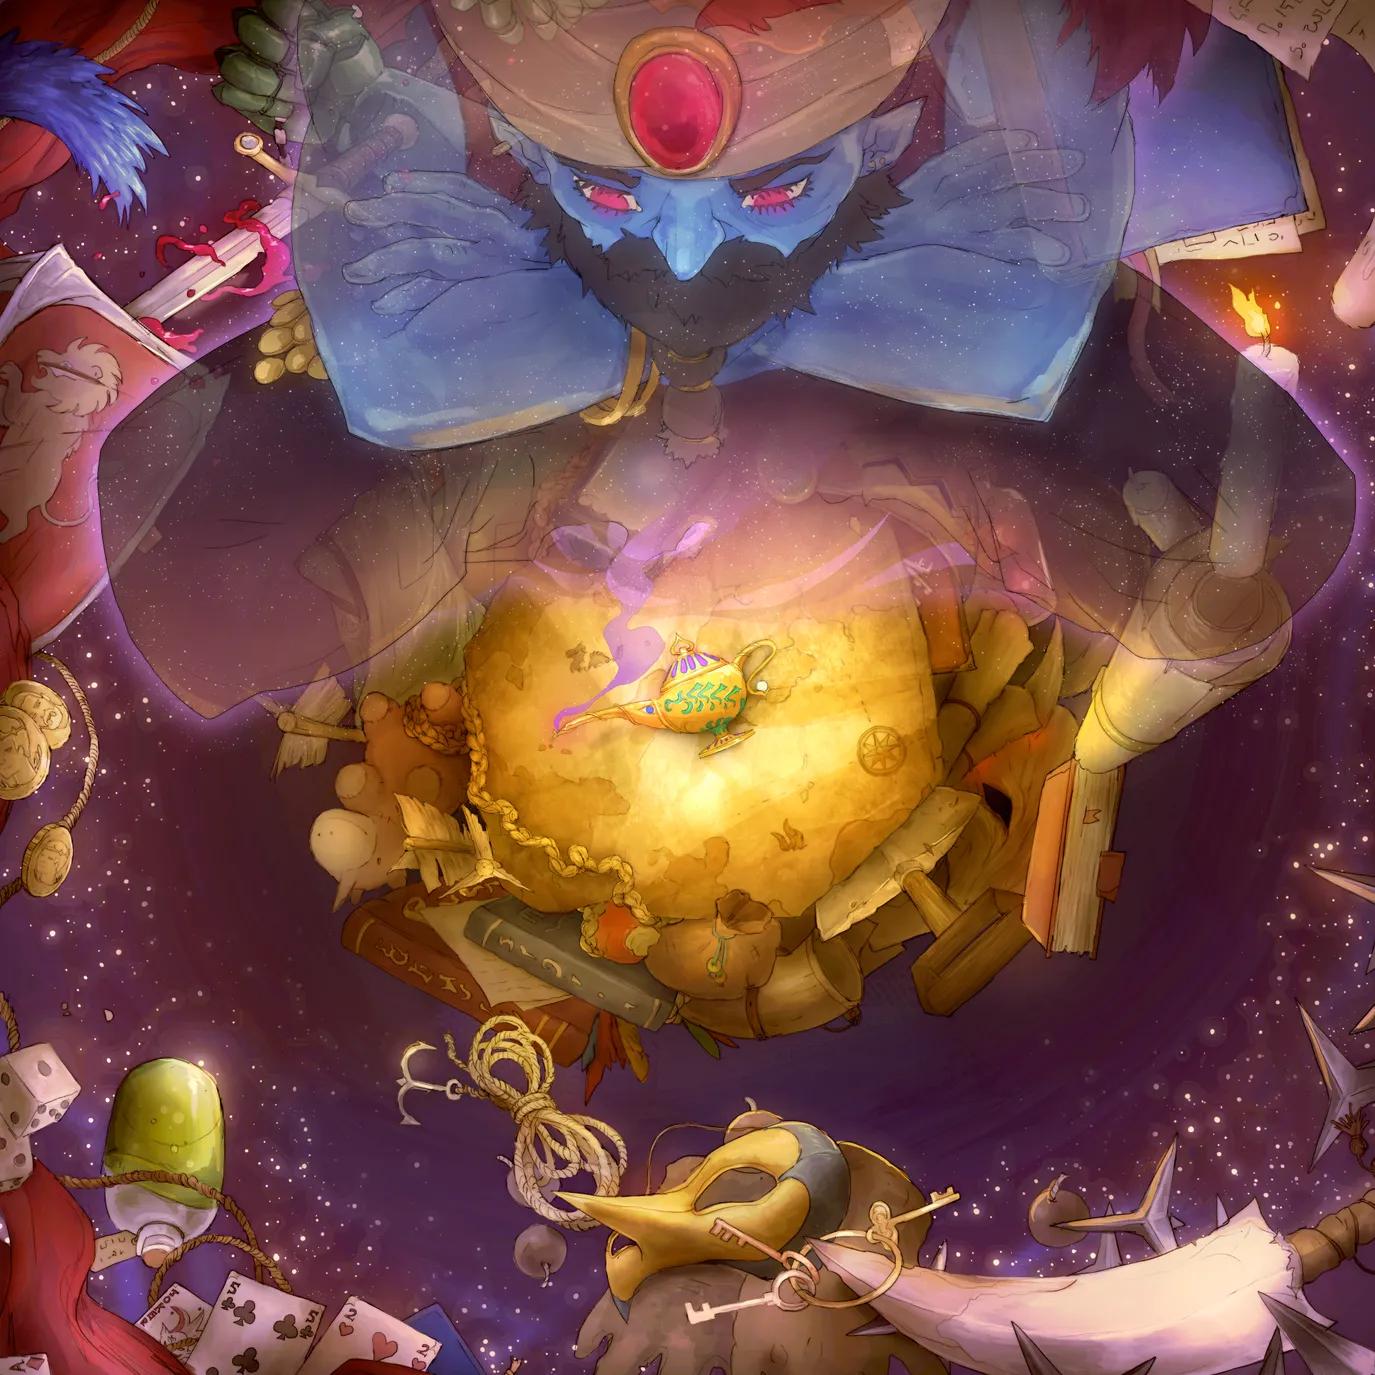 Inside a Bag of Holding map, Genie variant thumbnail